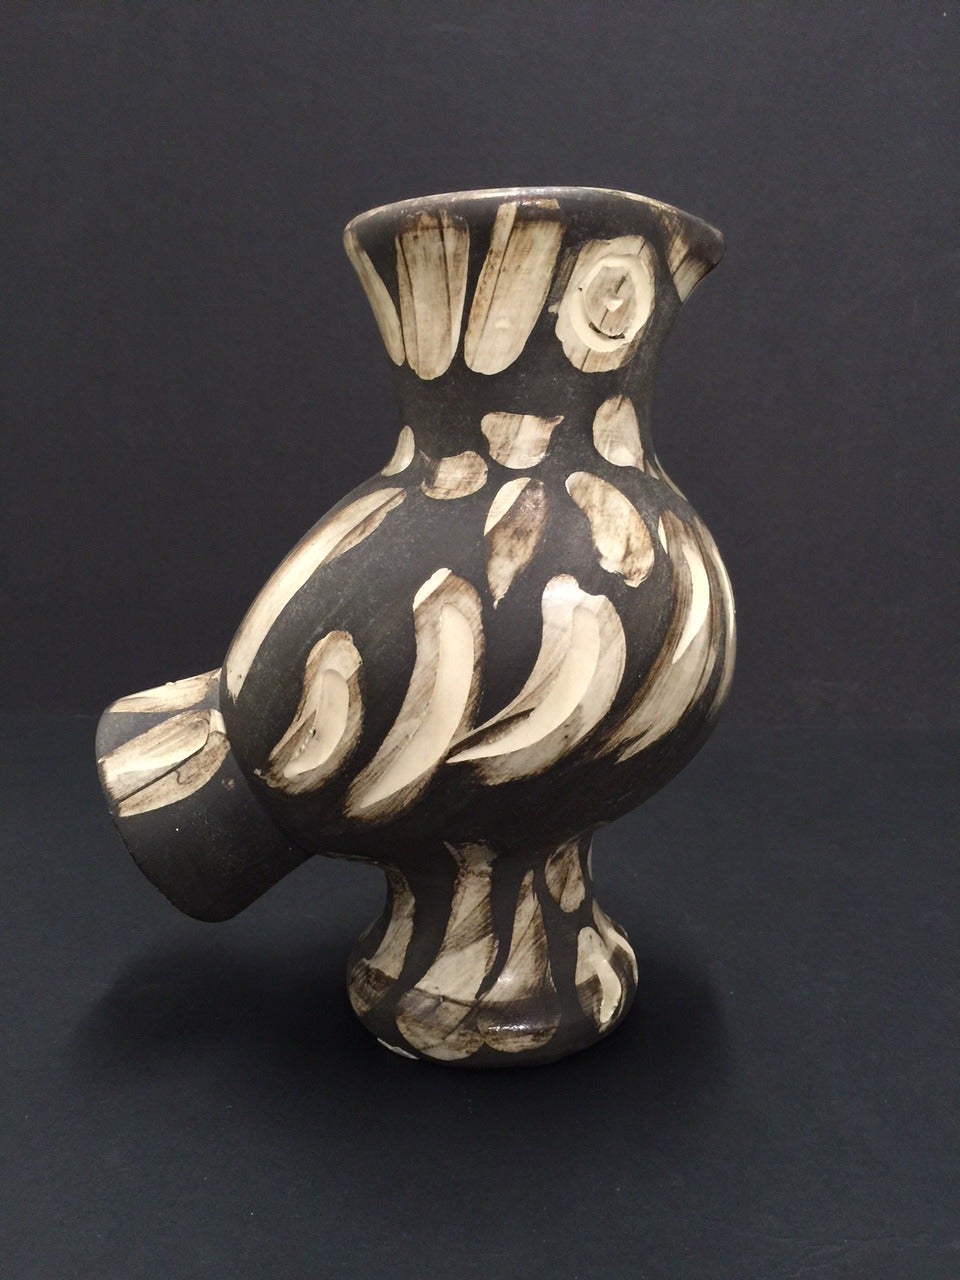 Original Pablo Picasso Ceramic Vase, made of white earthenware clay, hand - painted with black and brown.From the edition of 500. Inscribed Madoura/Edition Picasso on verso. 

(AR 605)